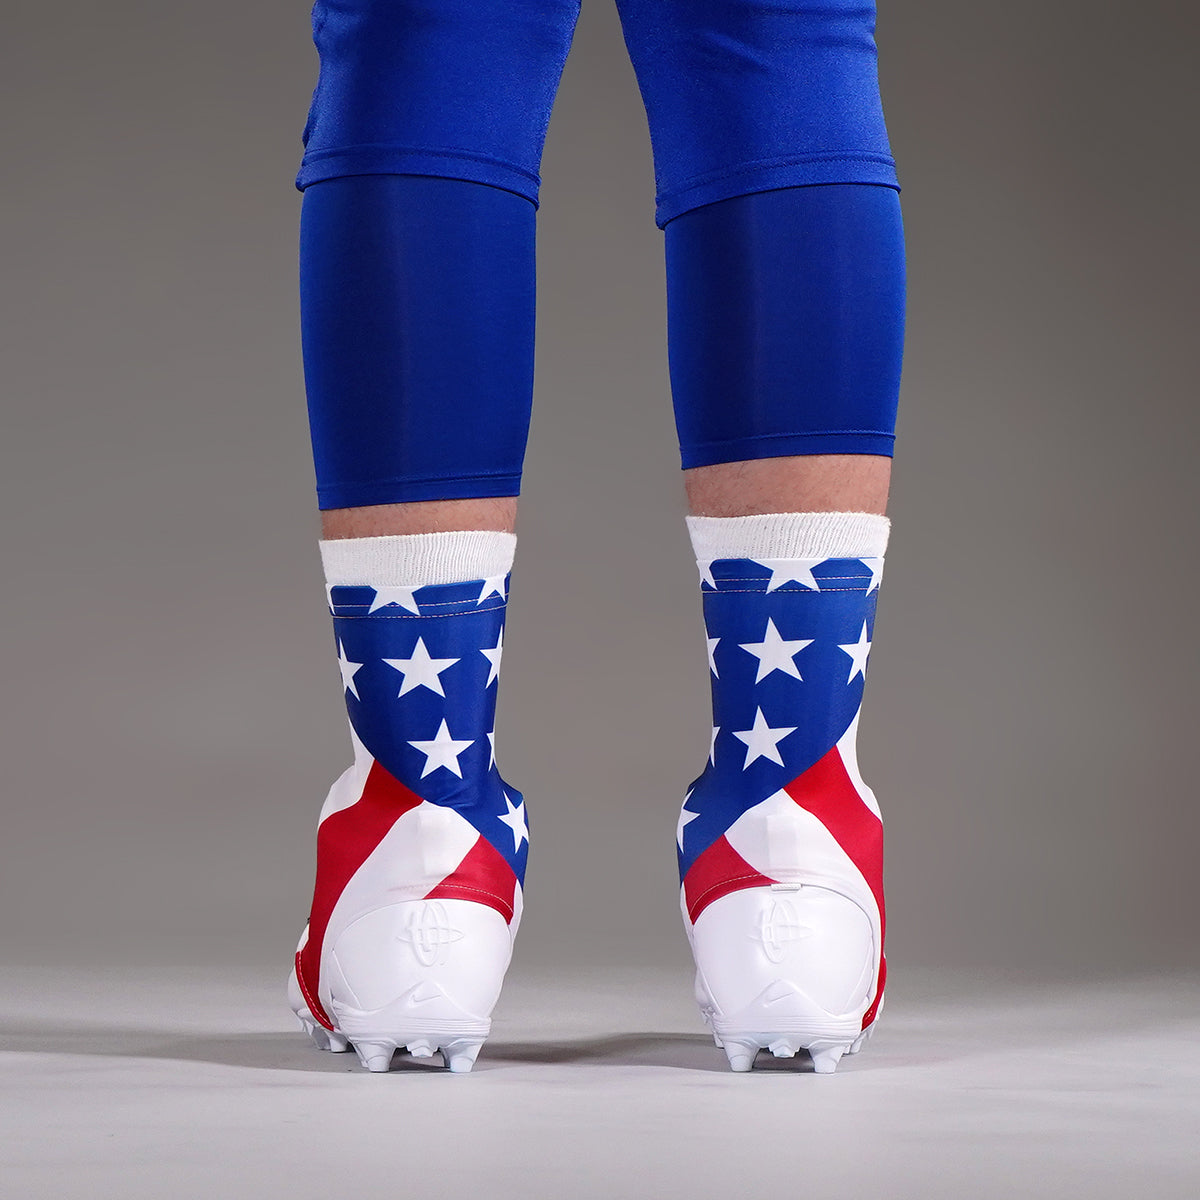 USA American Flag Spats / Cleat Covers